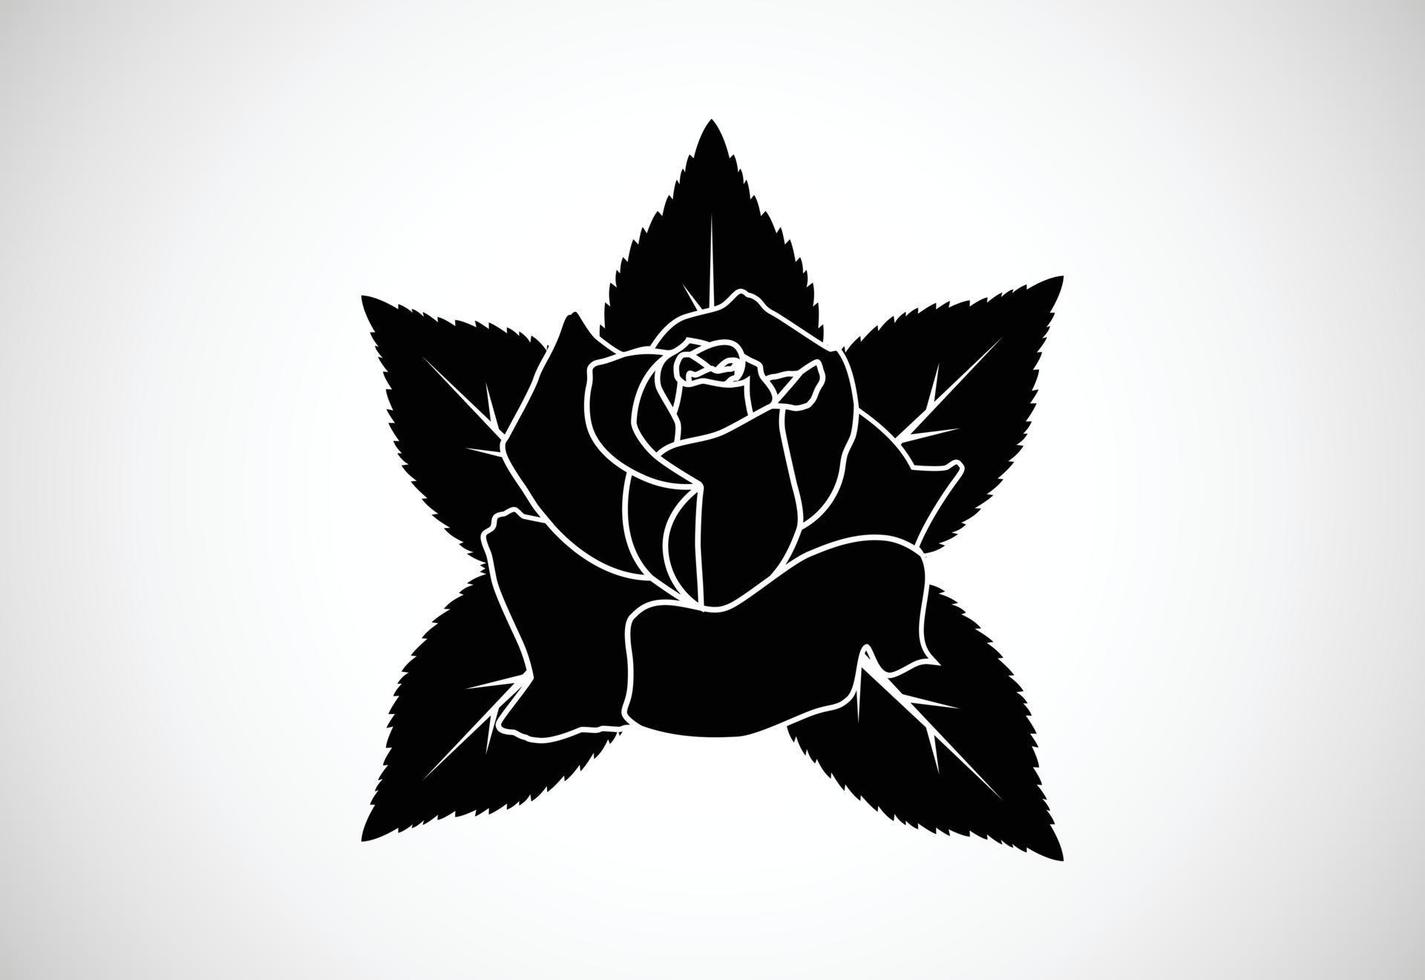 Black and white rose with leaves vector illustration